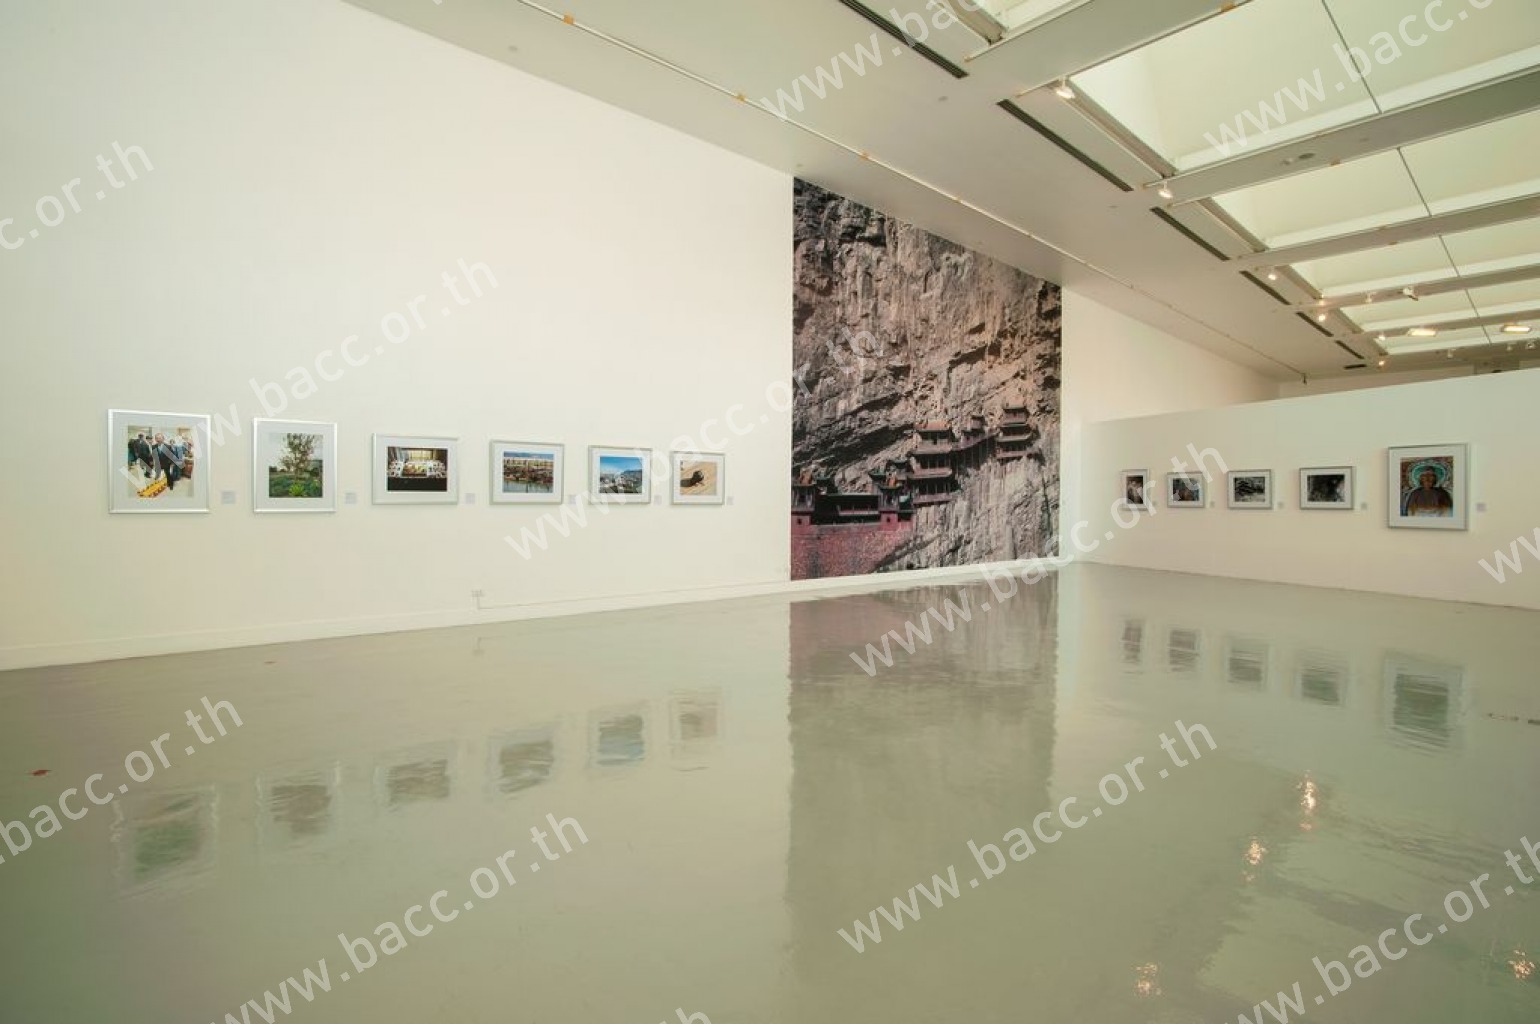 A Photography Exhibition by Her Royal Highness Princess Maha Chakri Sirindhorn: Clairvoyance